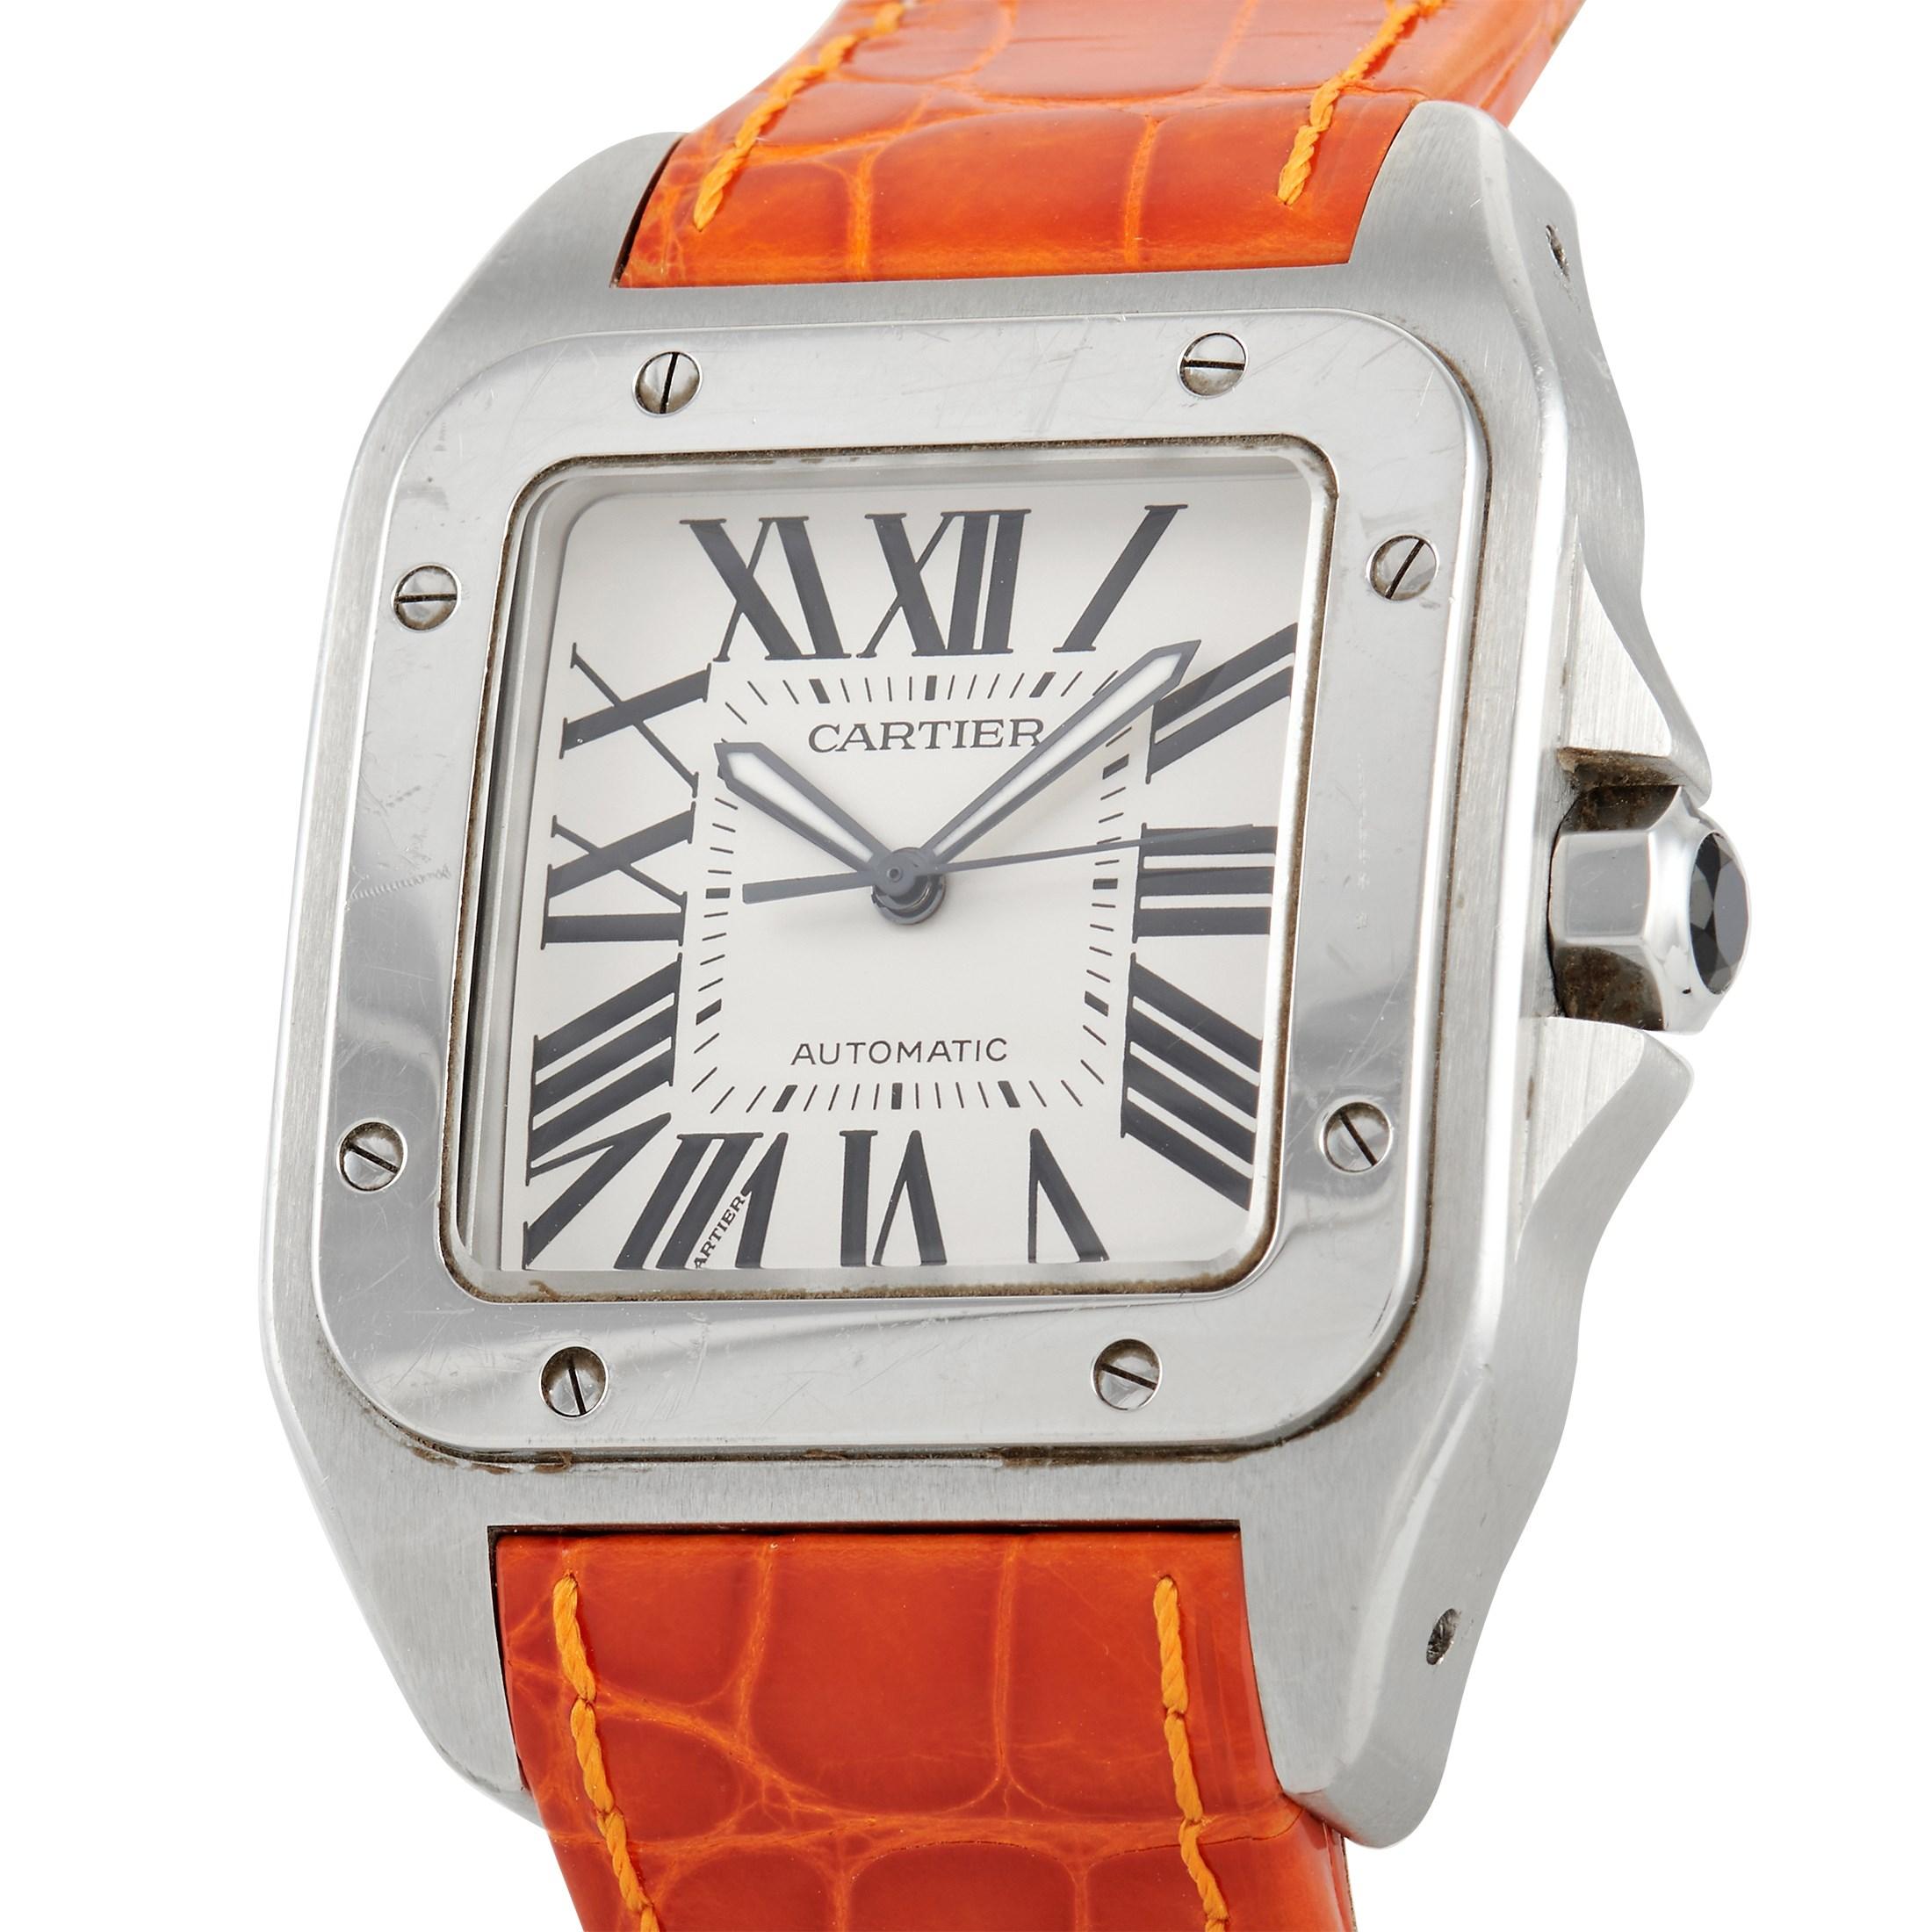 The Cartier Santos 100 XL Watch, reference number 2656, is bold, colorful, and impossible to ignore. 

On this watch, a square 38mm case made from Stainless Steel comes to life thanks to the screw-down accents located on the bezel. On the classic